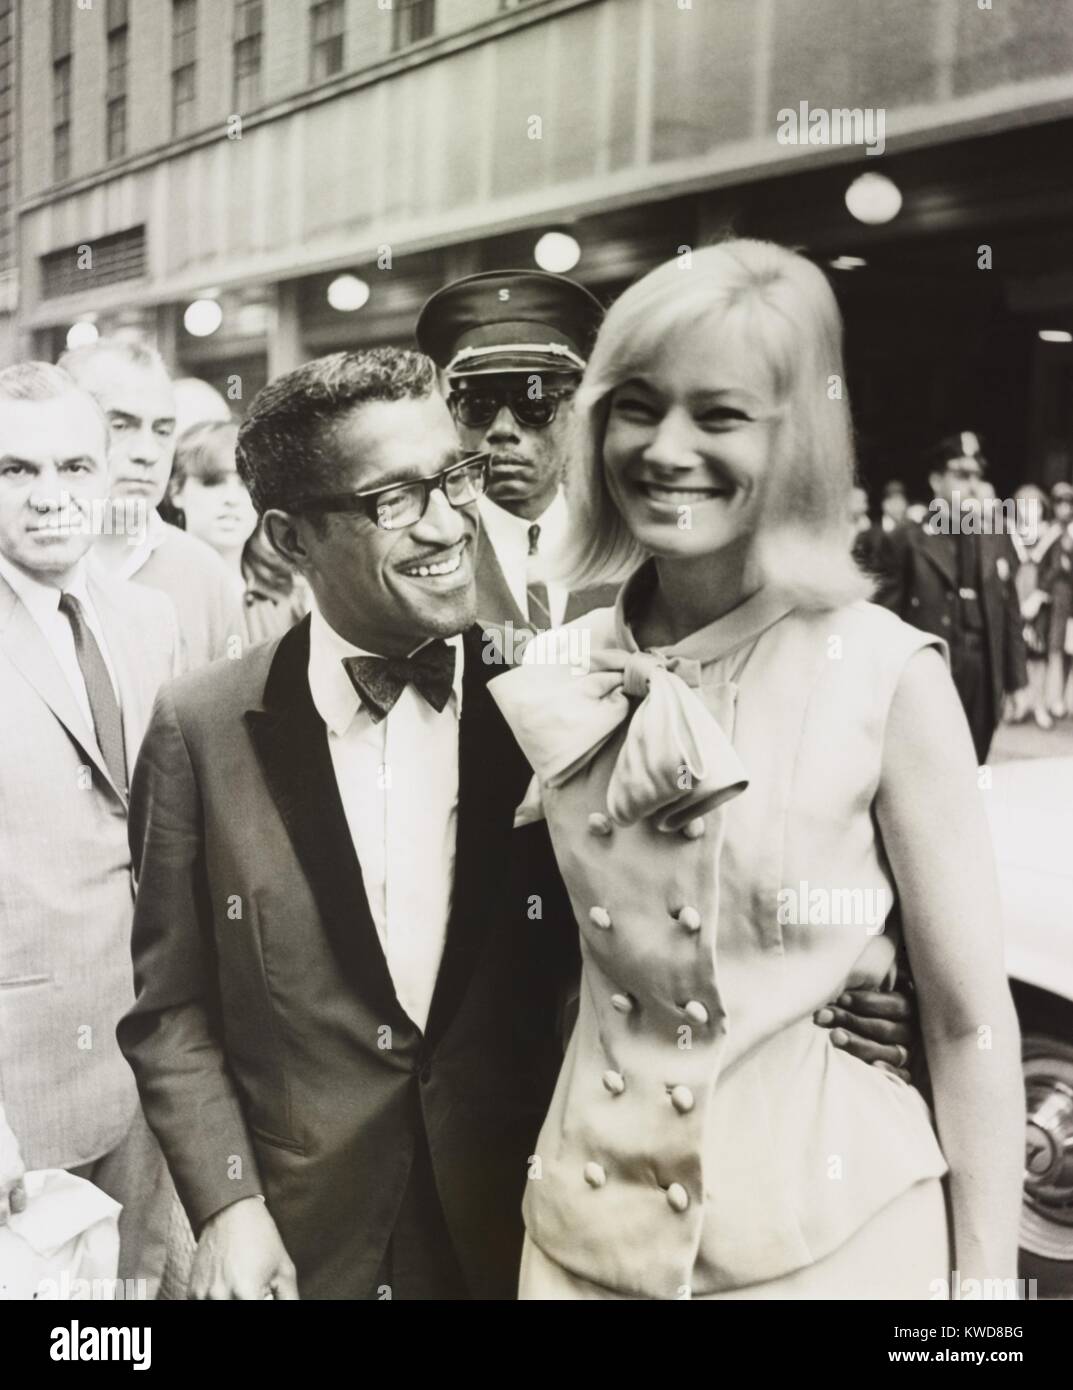 African America Actor Sammy Davis and his Swedish born wife, actress May Britt. They attended the premiere of 'The Roar of the Greasepaint - The Smell of the Crowd,' at the Shubert Theater, New York City, May 17. 1965. (BSLOC 2015 17 223) Stock Photo